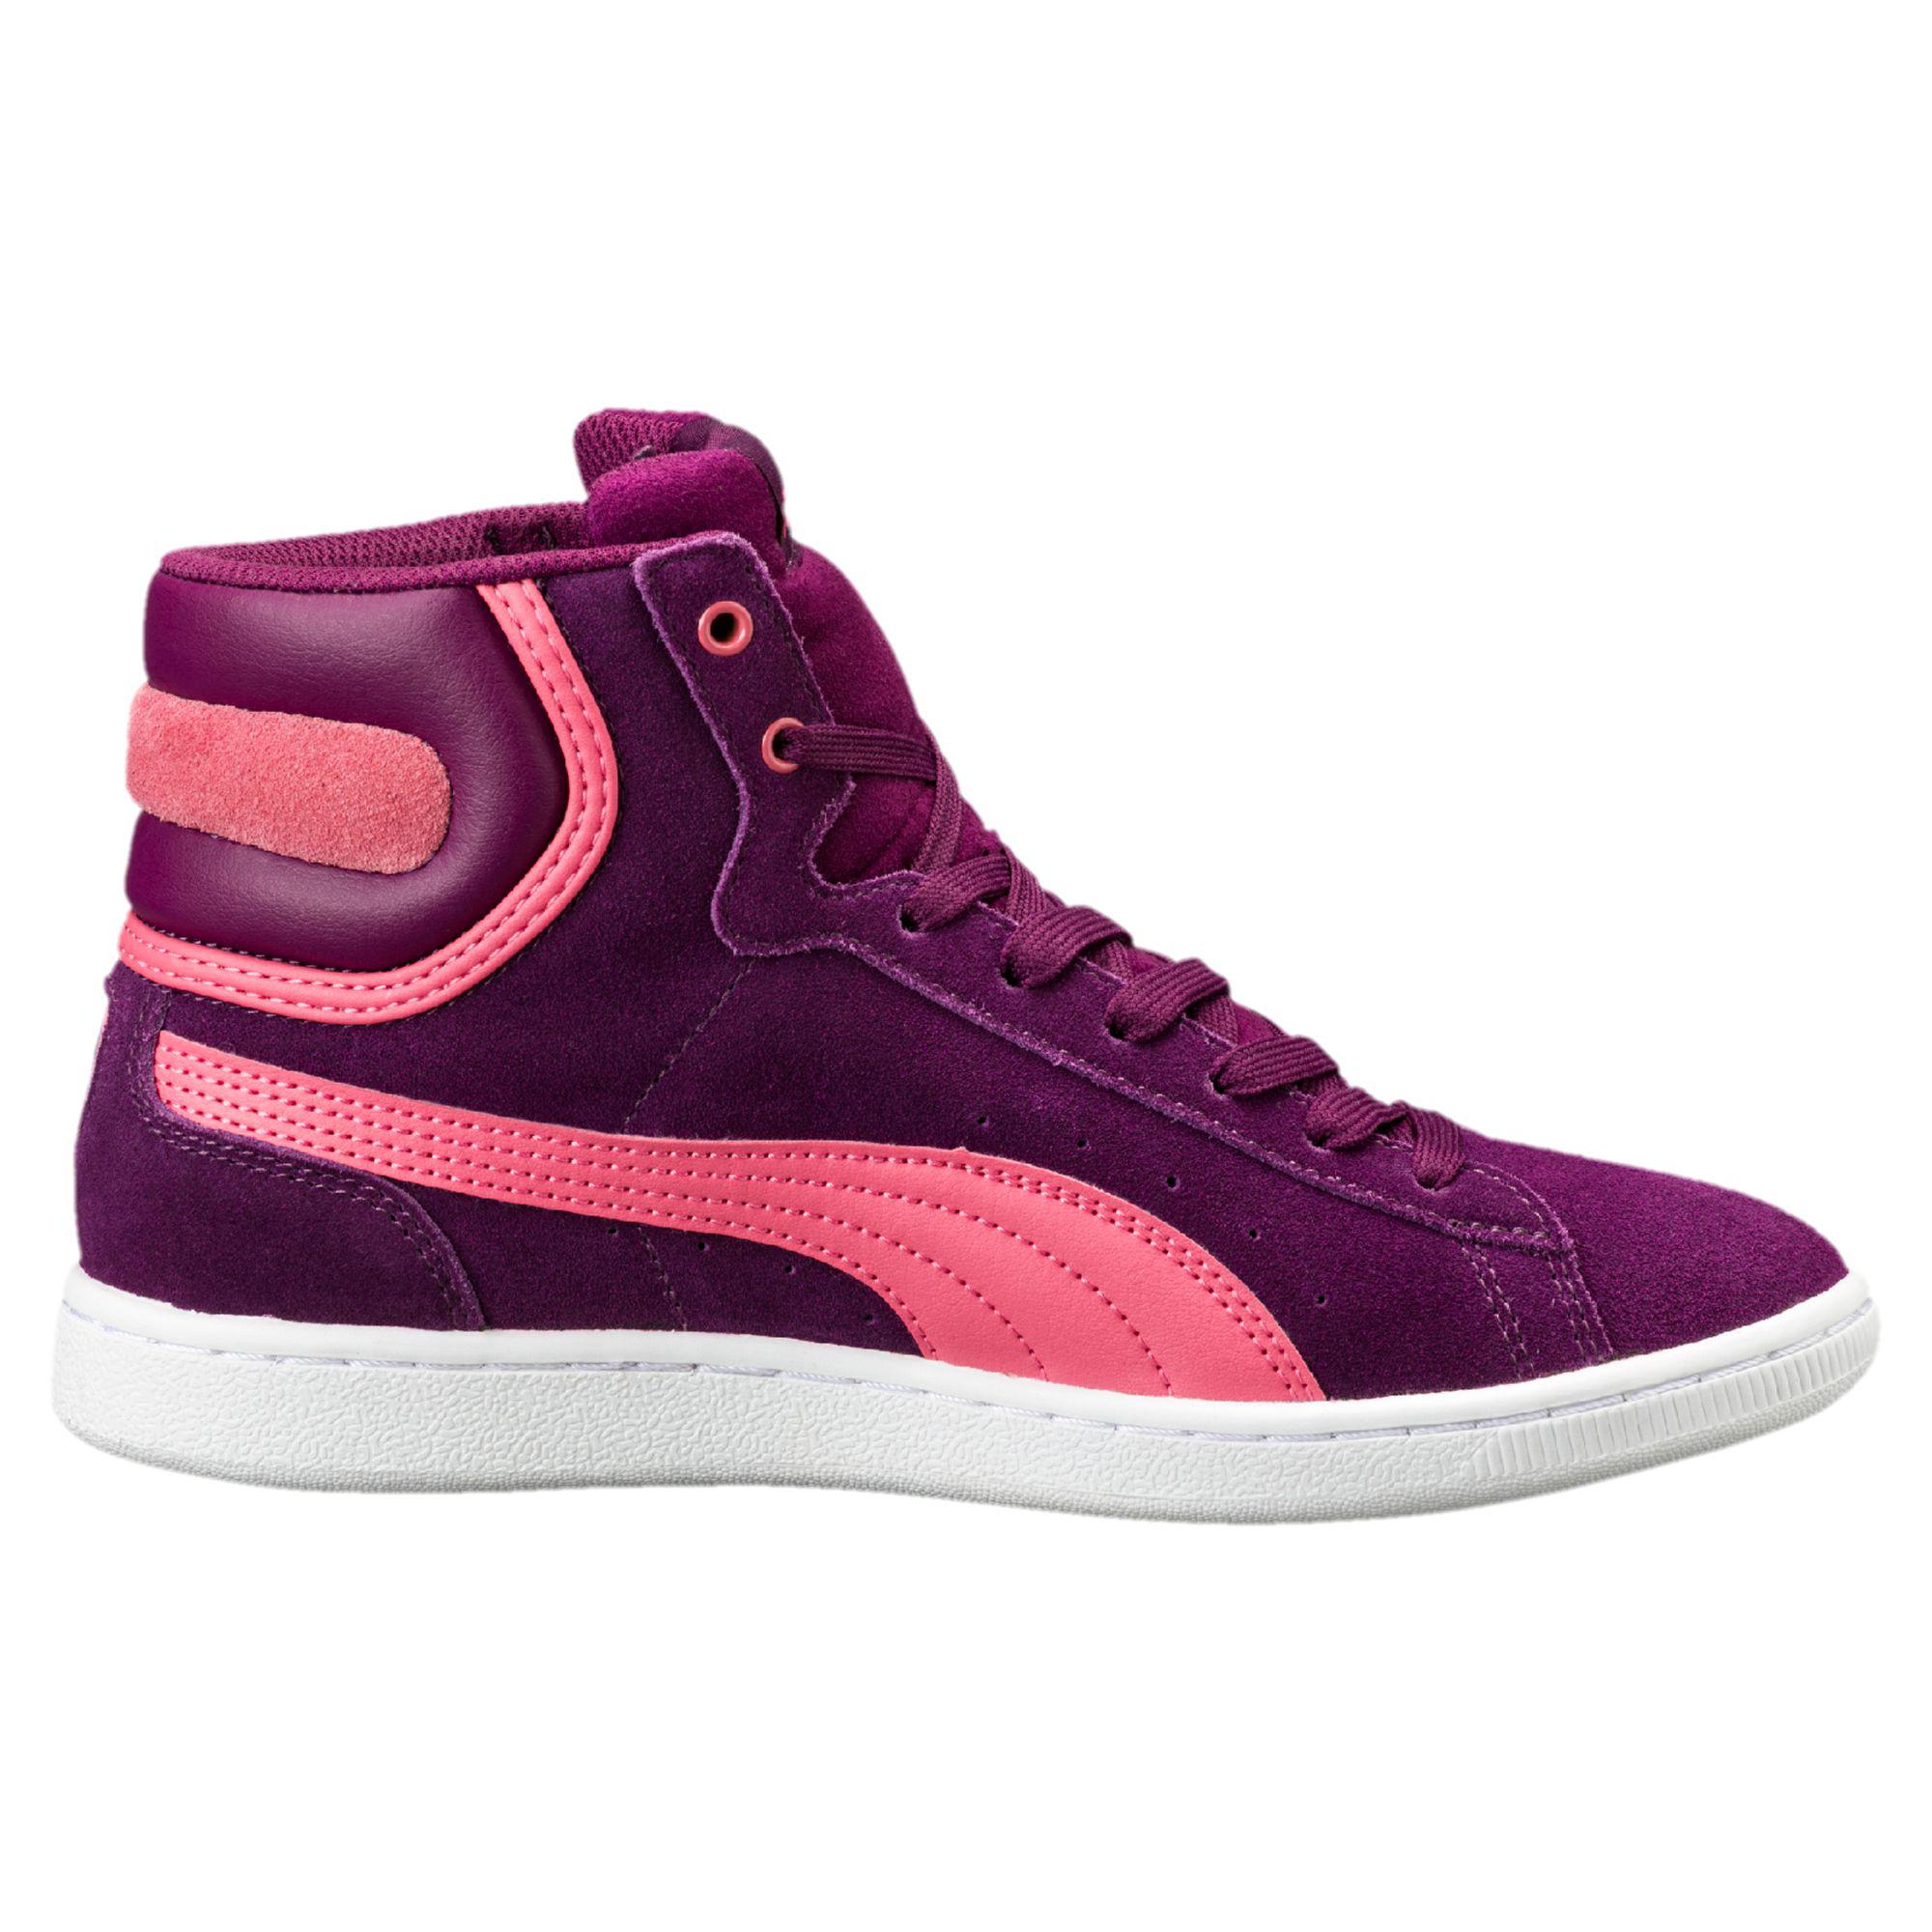 PUMA Suede Vikky Mid Women's High Top Sneakers in Purple - Lyst